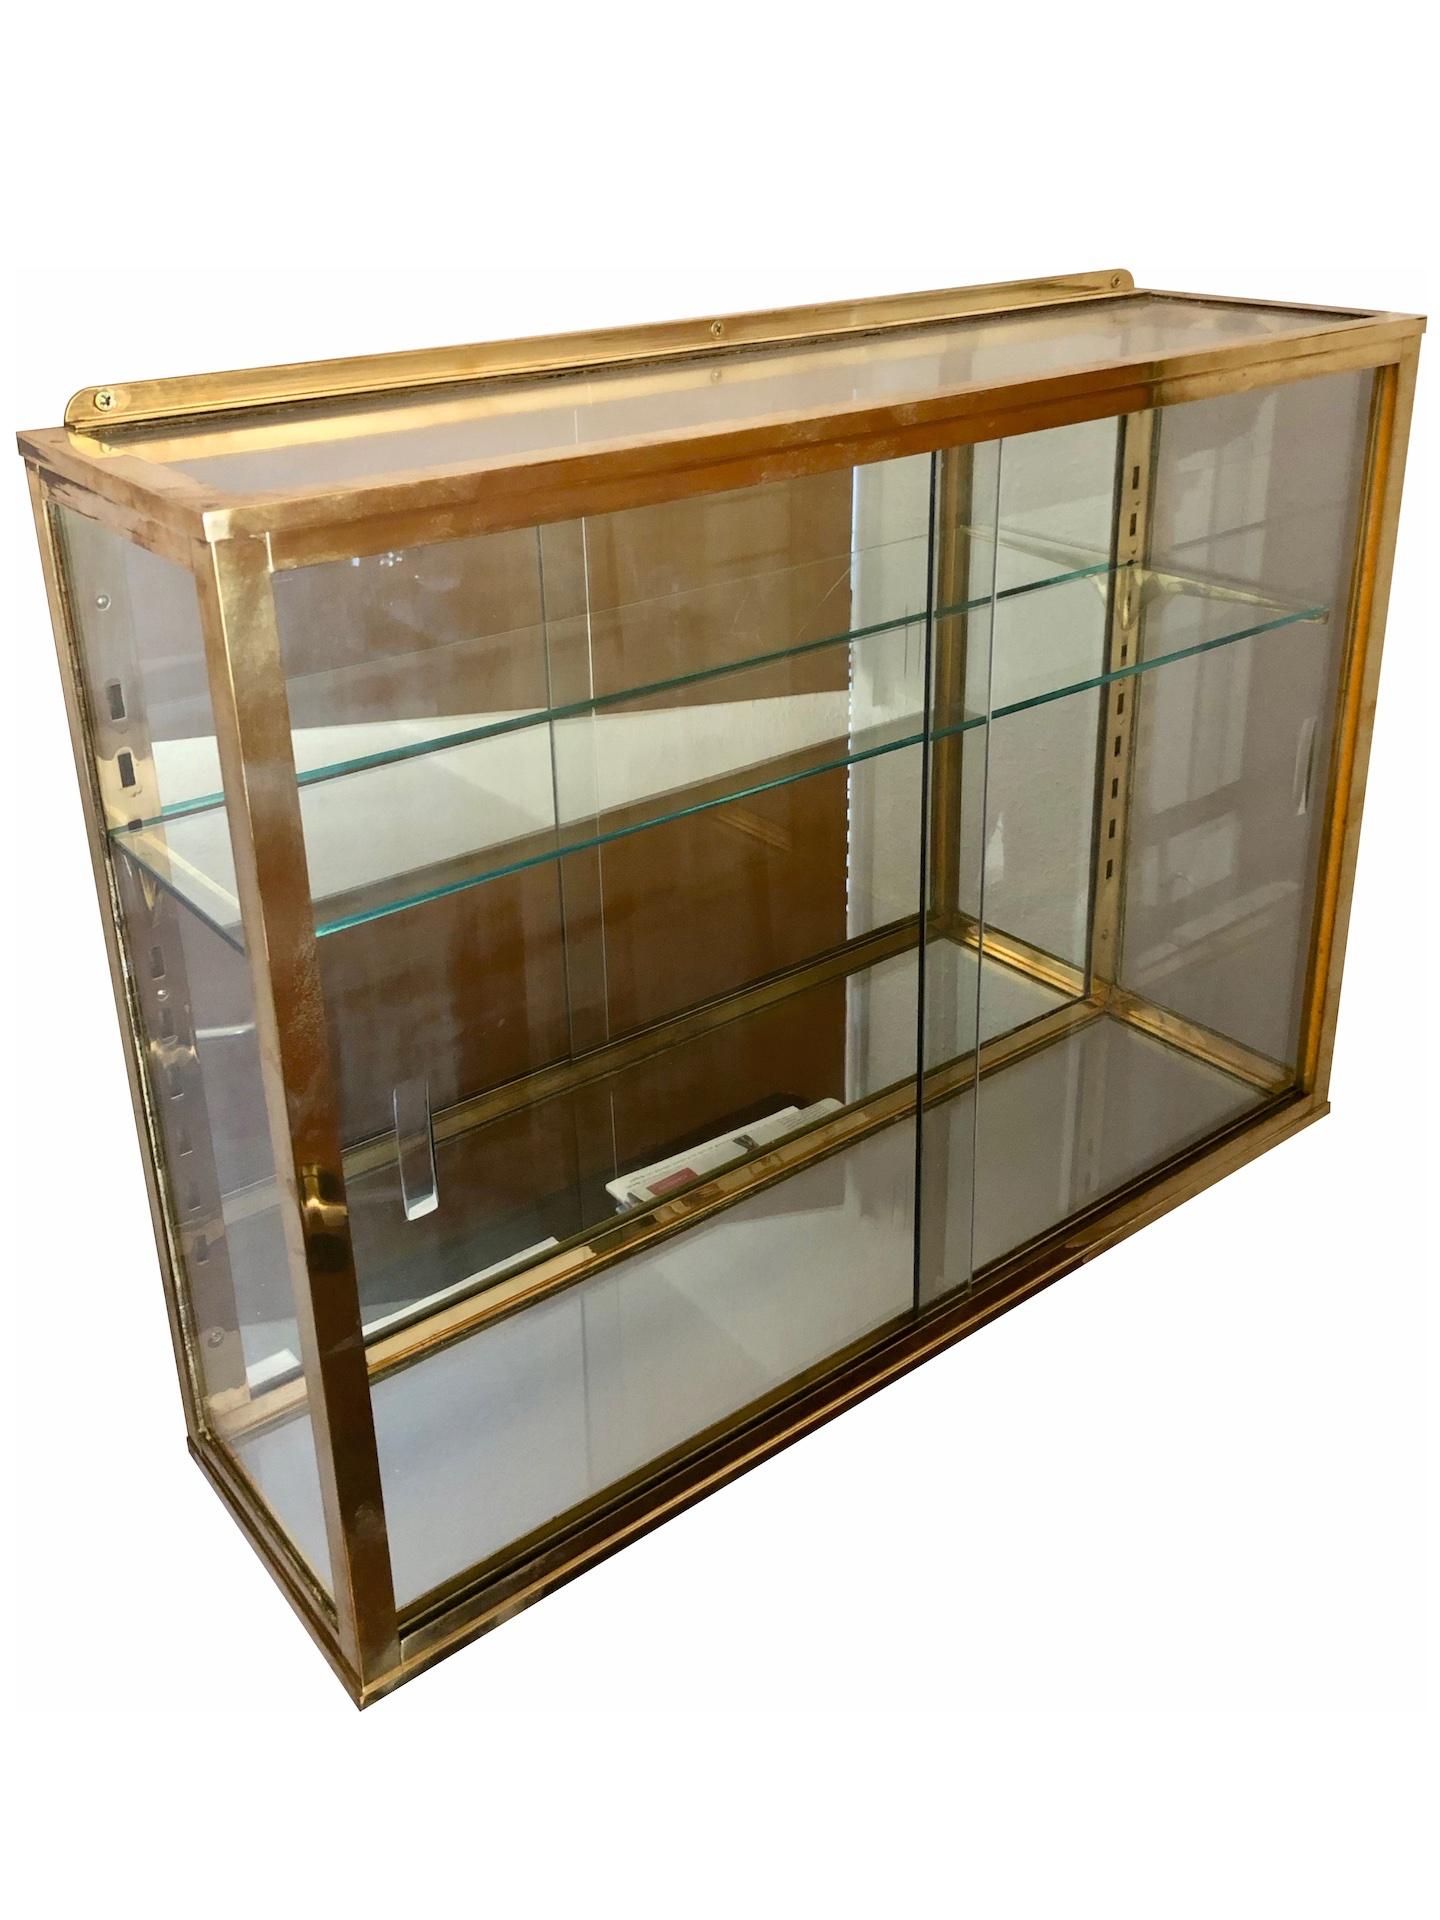 Hanging wall vitrine for collection objects in brass 
One shelf, height adjustable 
France, 1940s
Original patina (just cleaned, not polished)

Dimensions:
Width: 75.5 cm
Height: 55 cm
Depth: 20 cm.